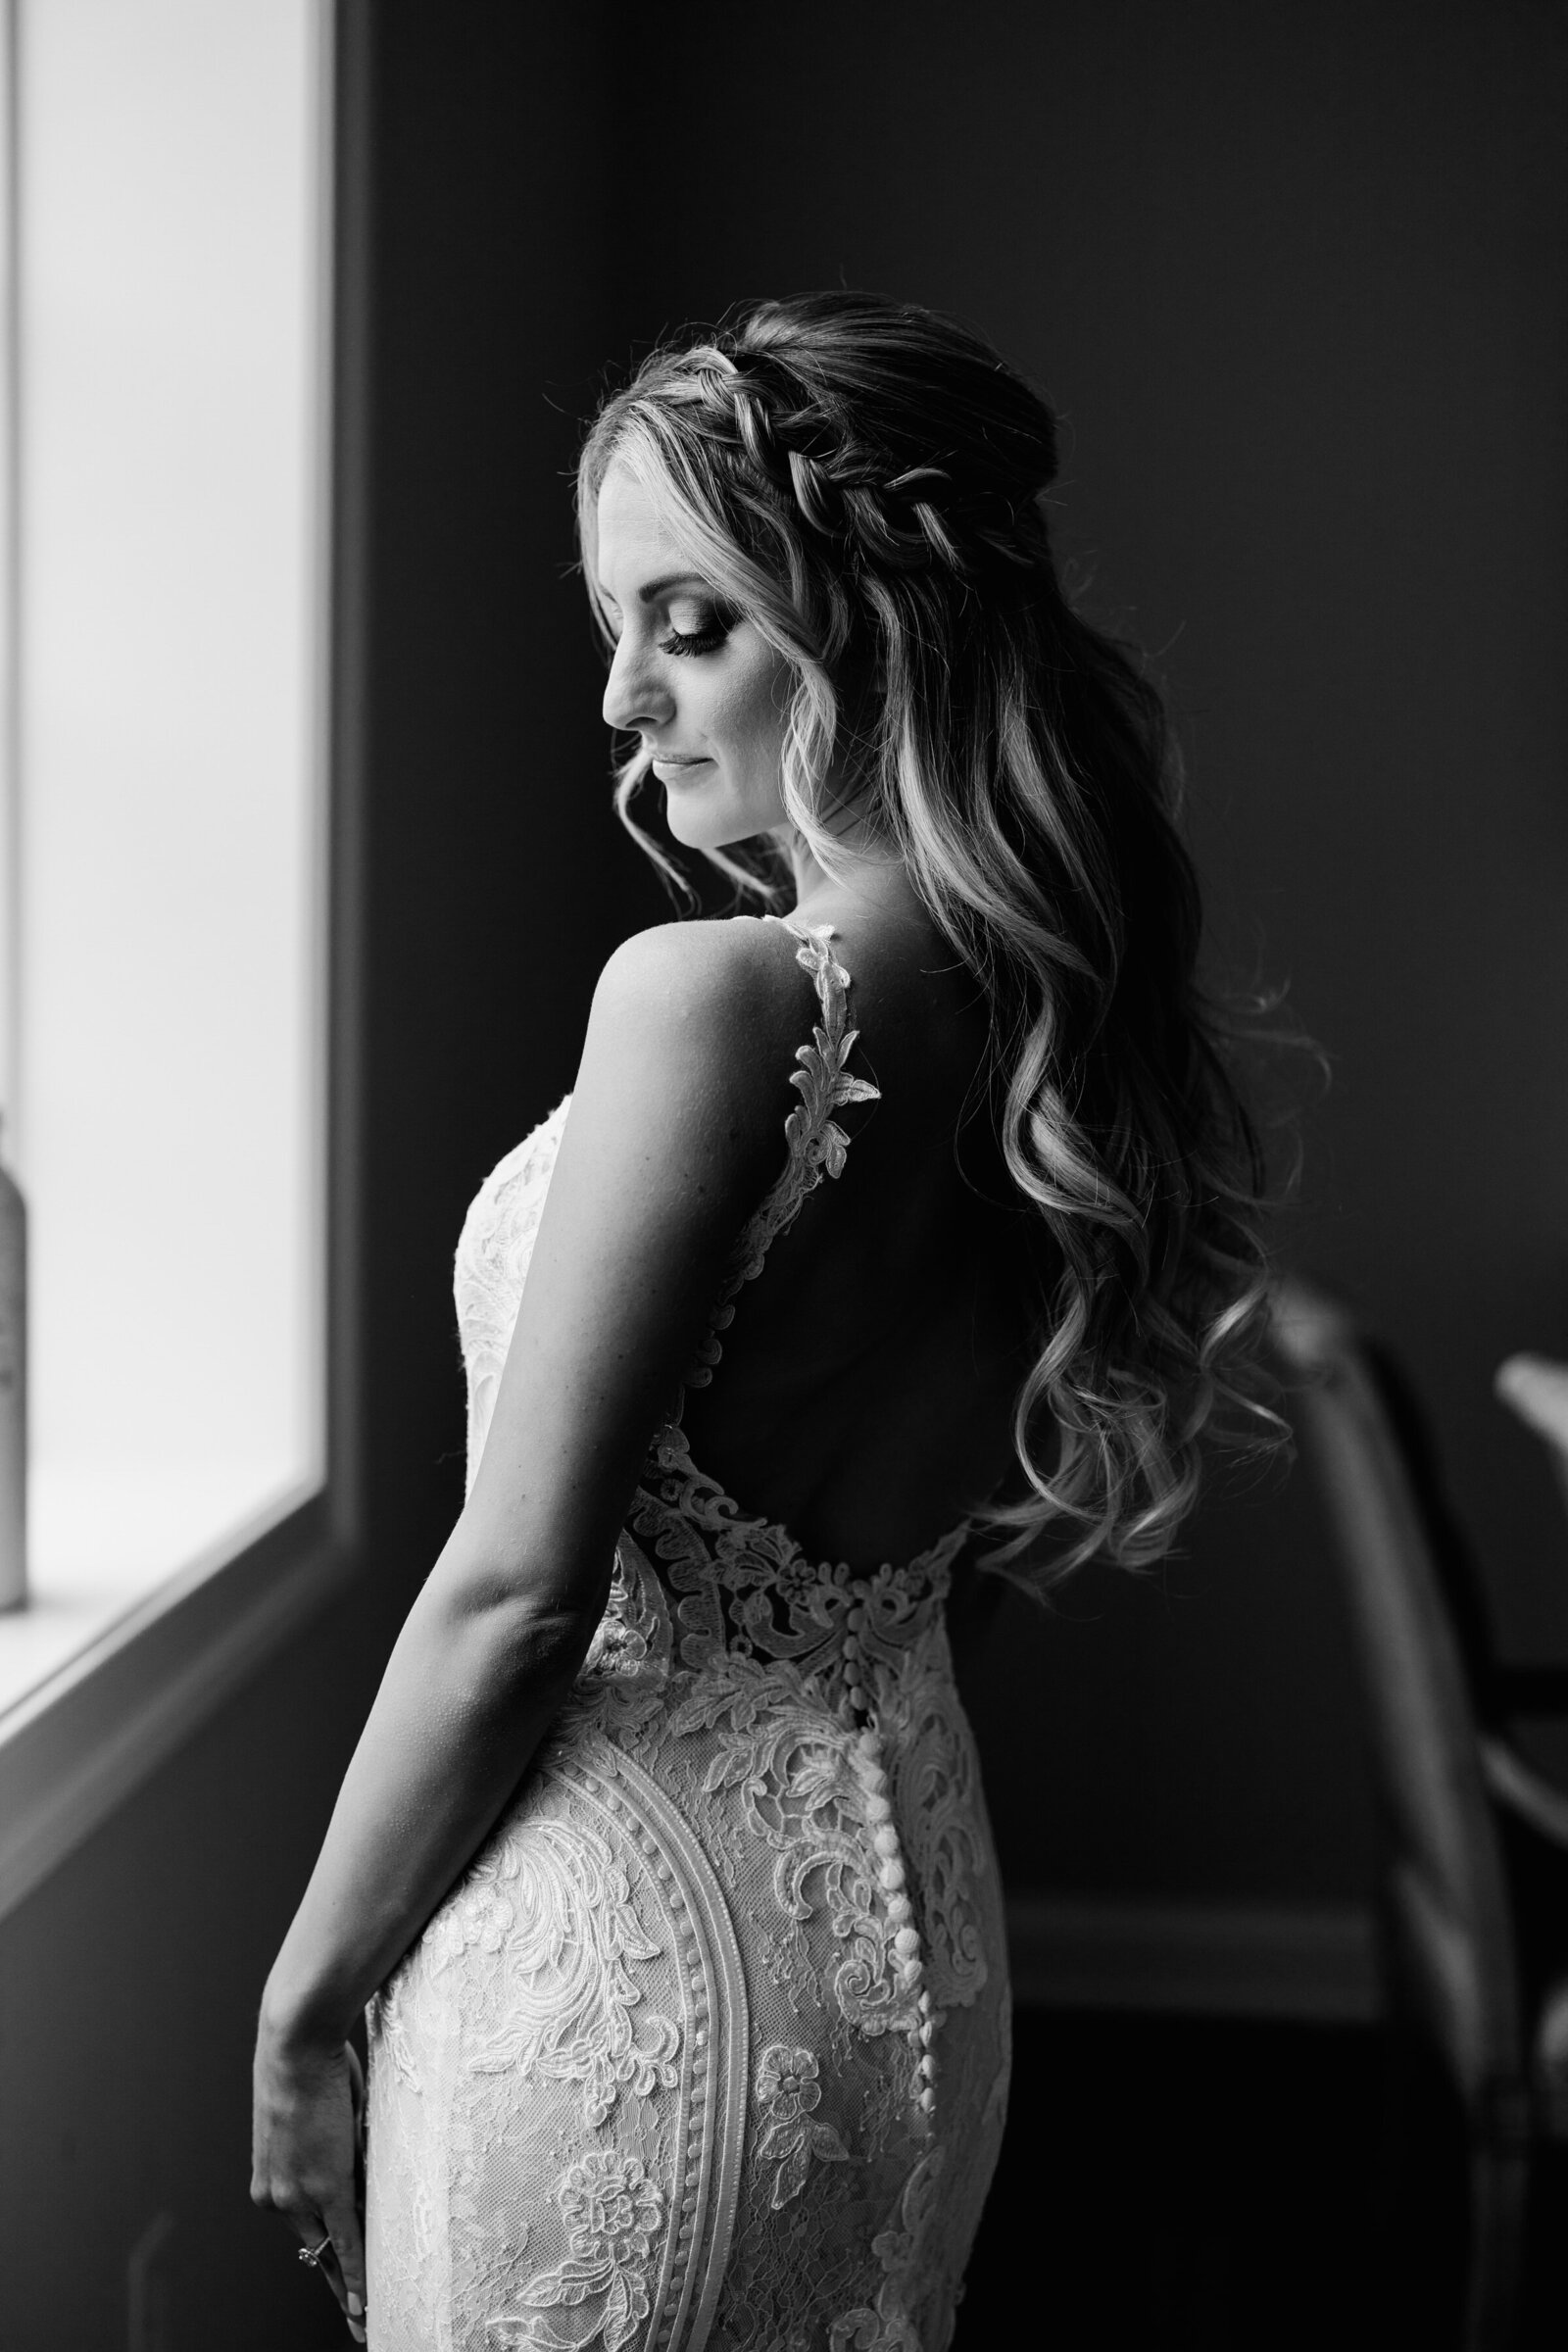 black and white image of bride lace dress at window